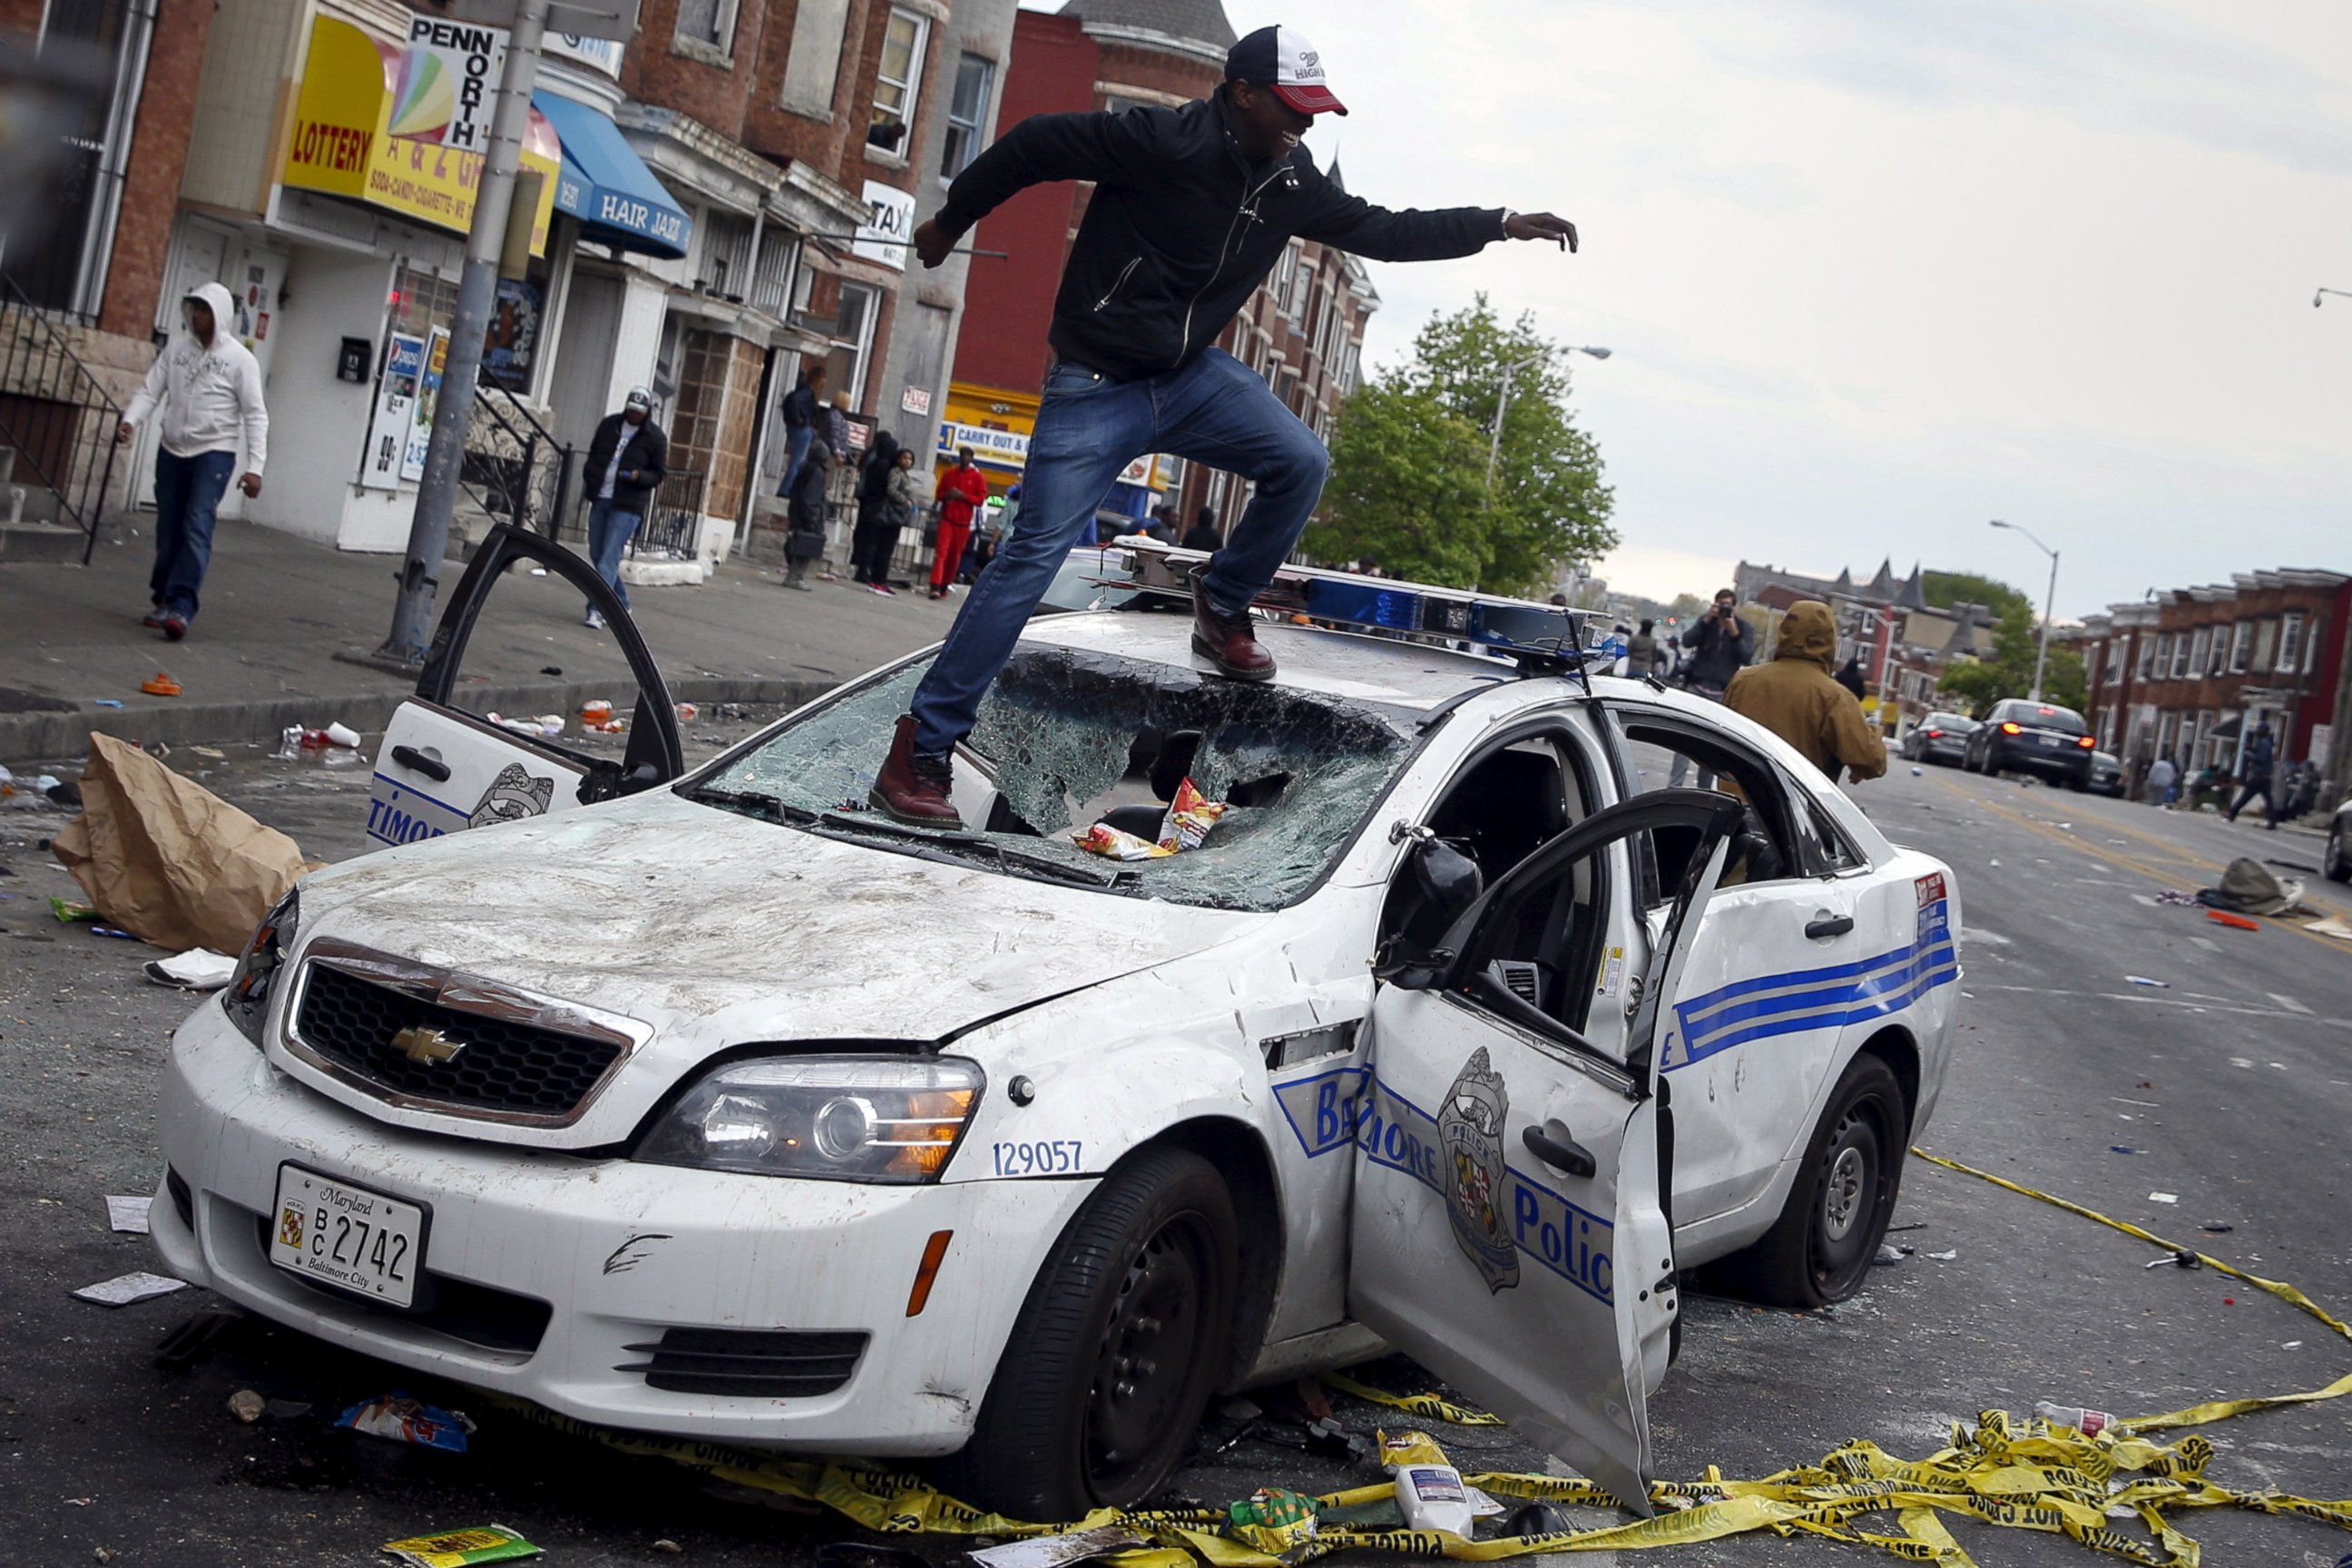 PHOTO: Demonstrators jump on a damaged Baltimore police department vehicle during clashes in Baltimore, Md., April 27, 2015.